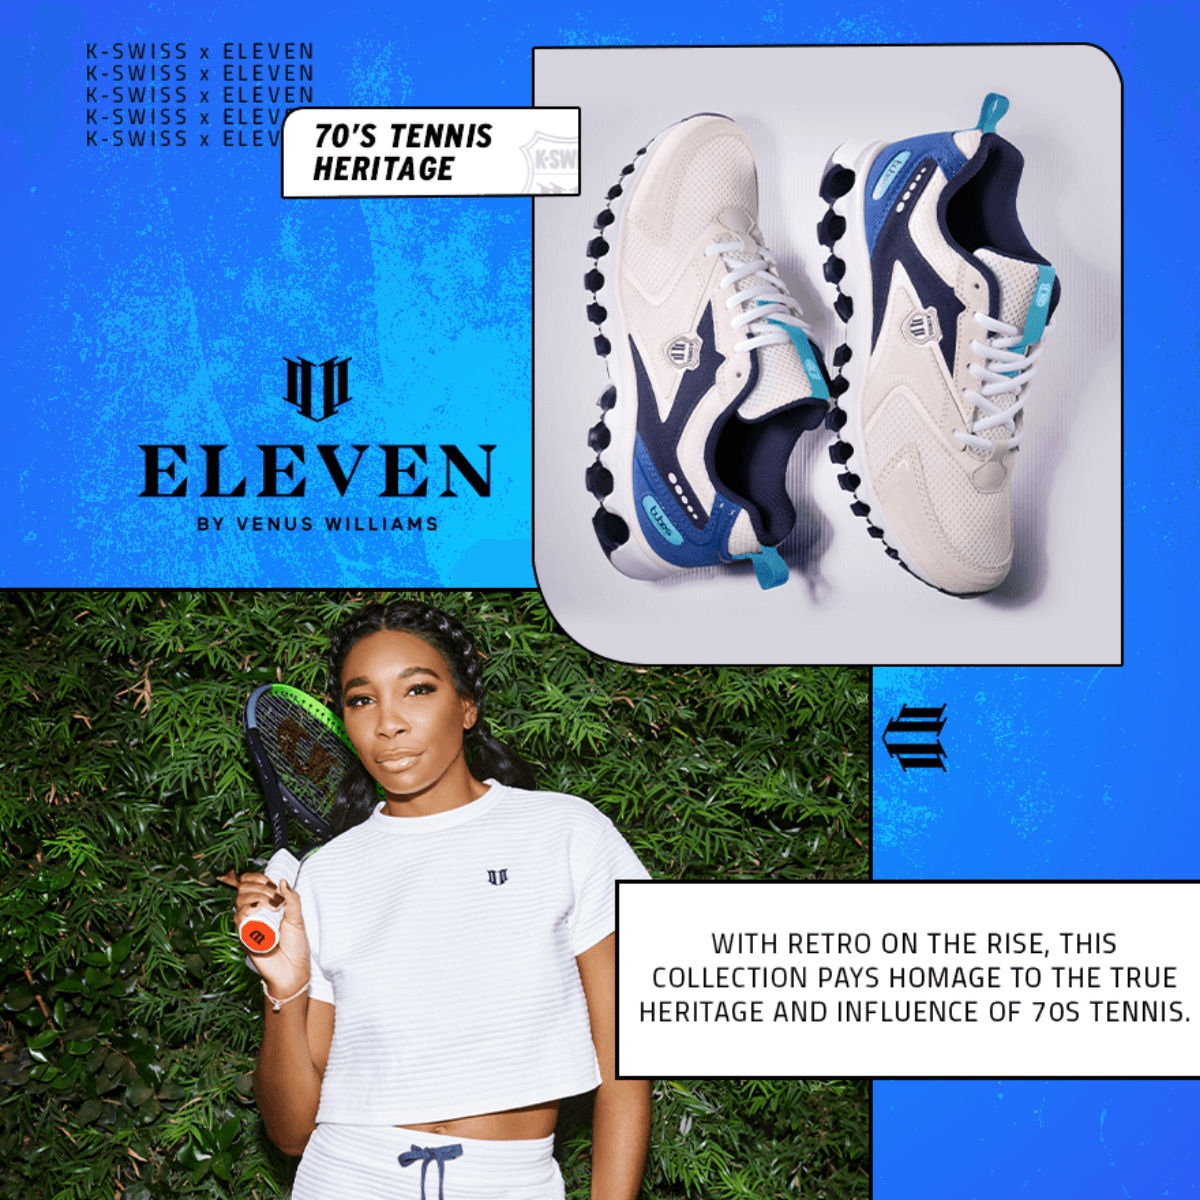 01KSWISS x Eleven_Carousel.png